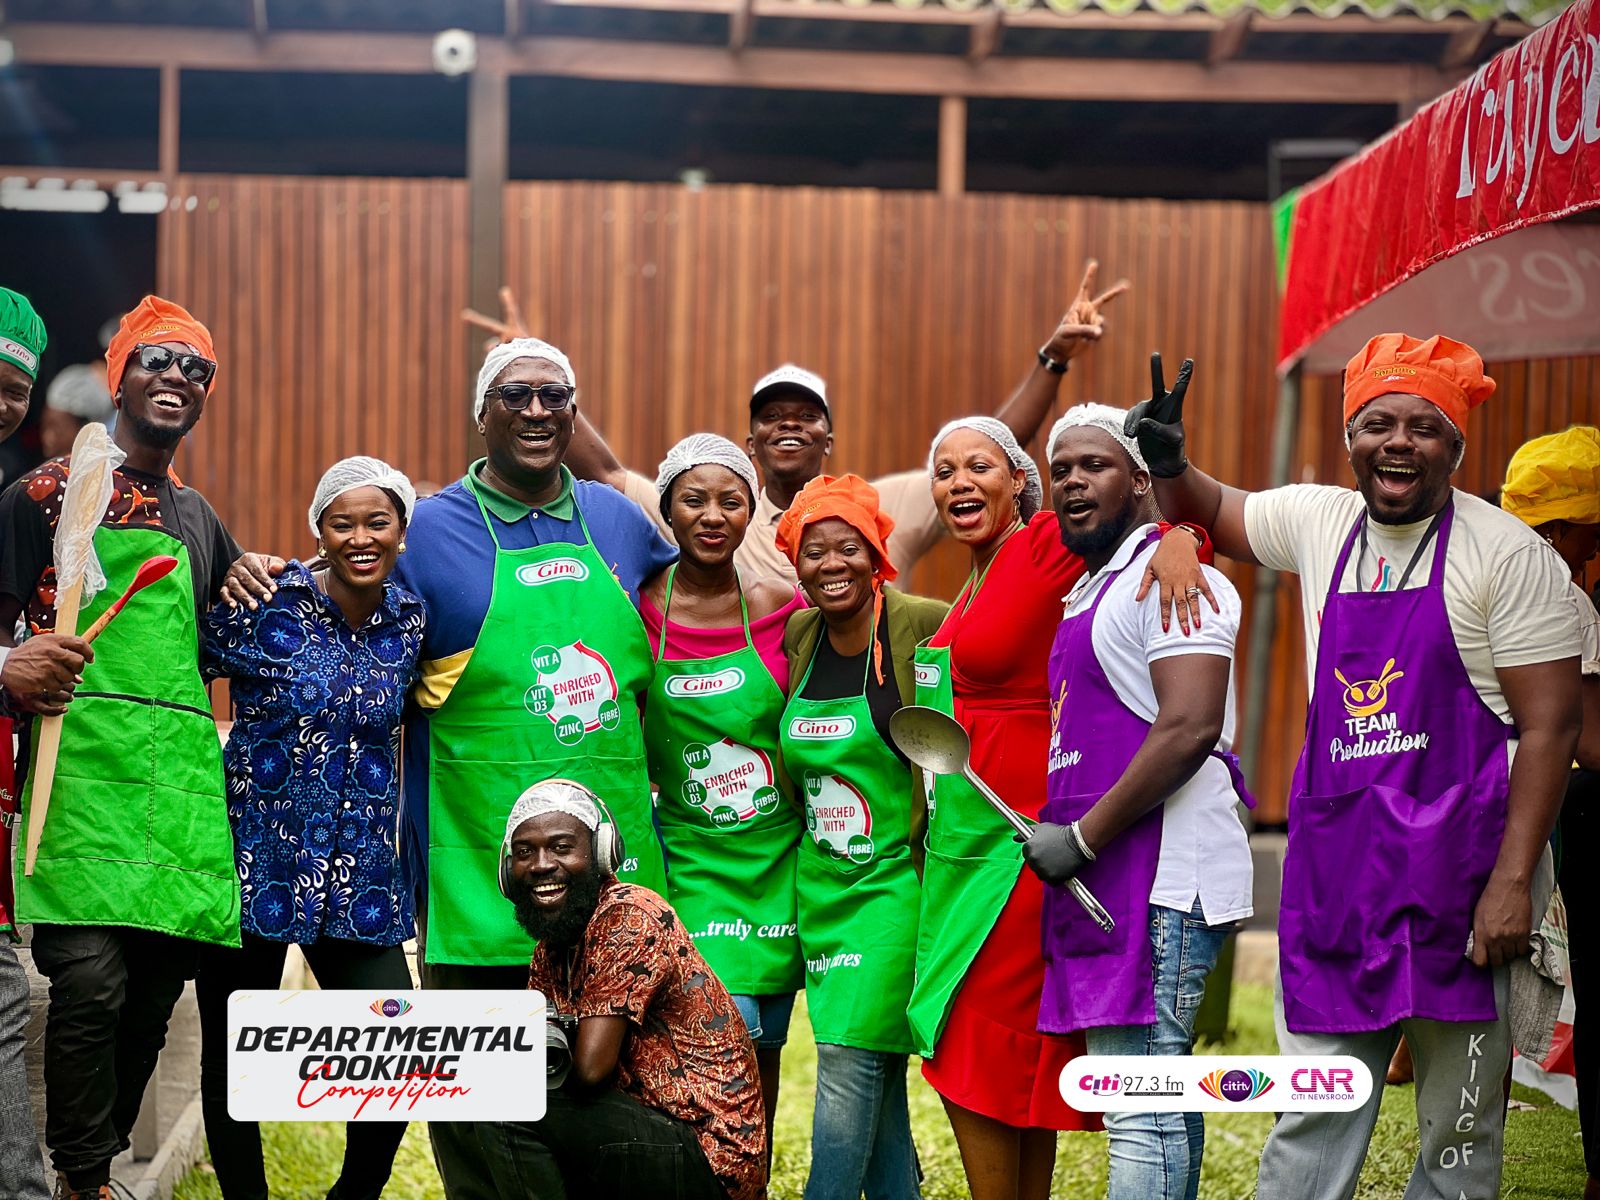 Production Team triumphs in Citi FM/TV inter-departmental cooking competition [Photos]